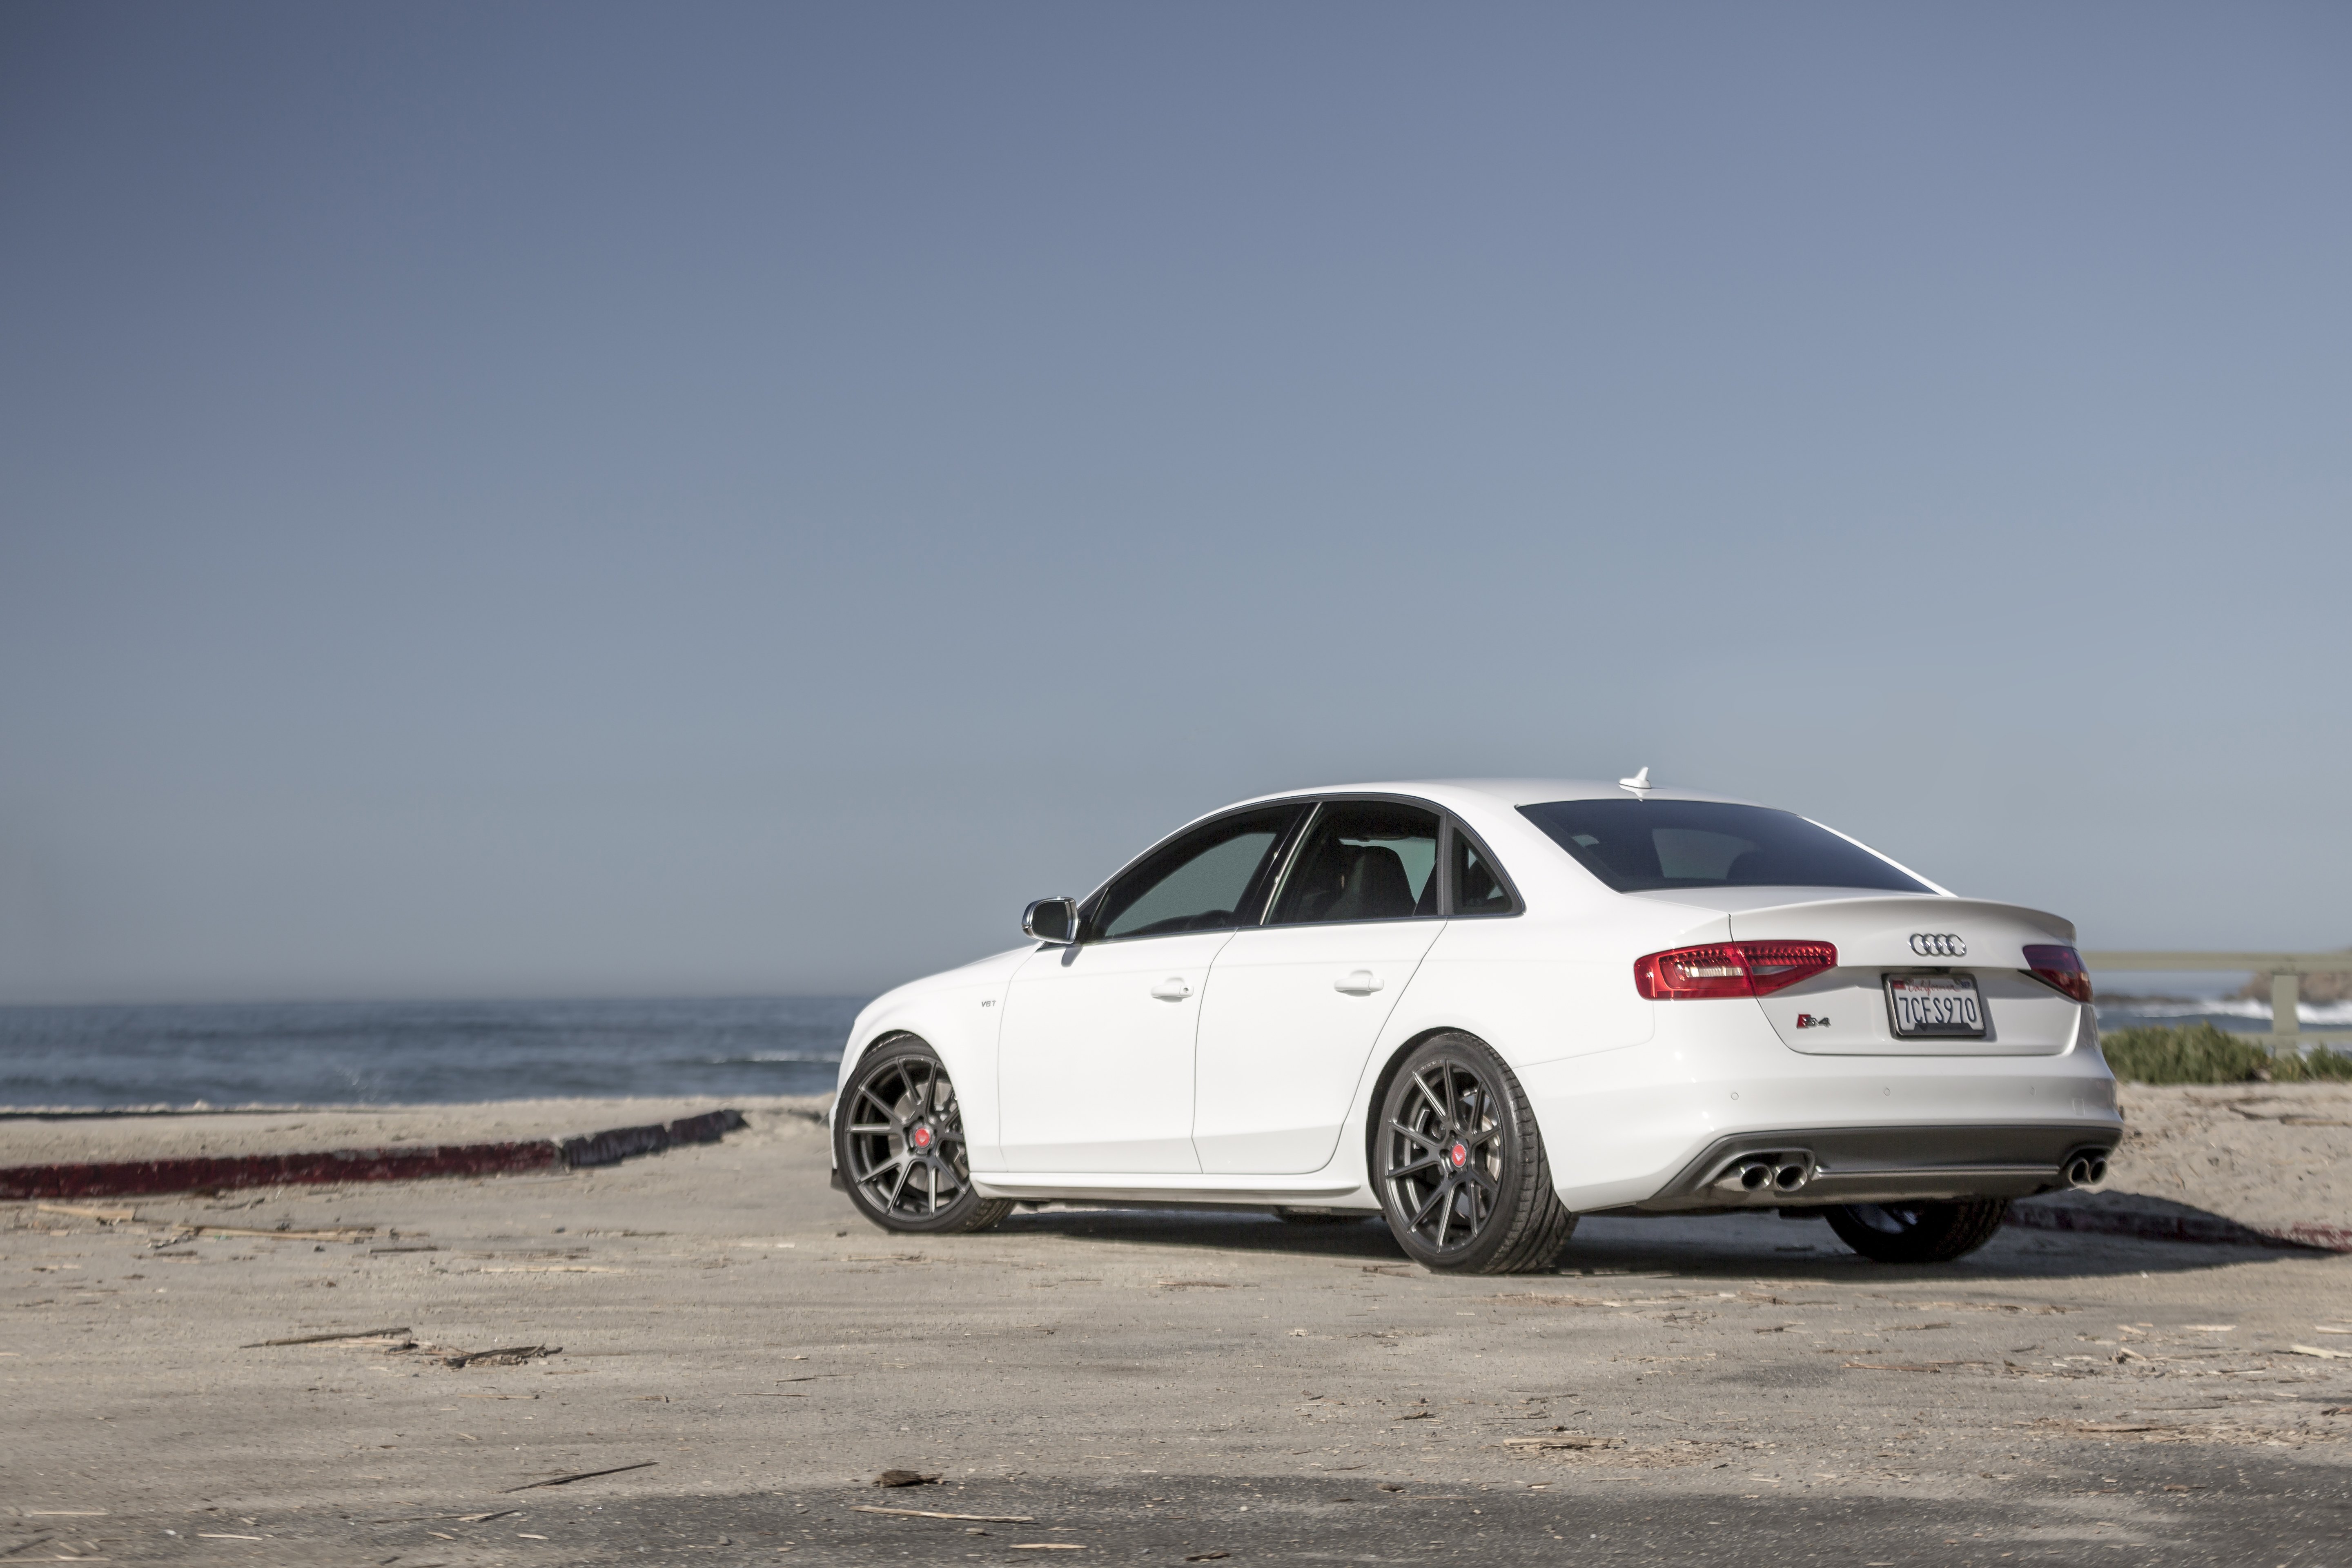 Rear Diffuser with Dual Exhaust Tips on White Audi S4 - Photo by Vorstiner